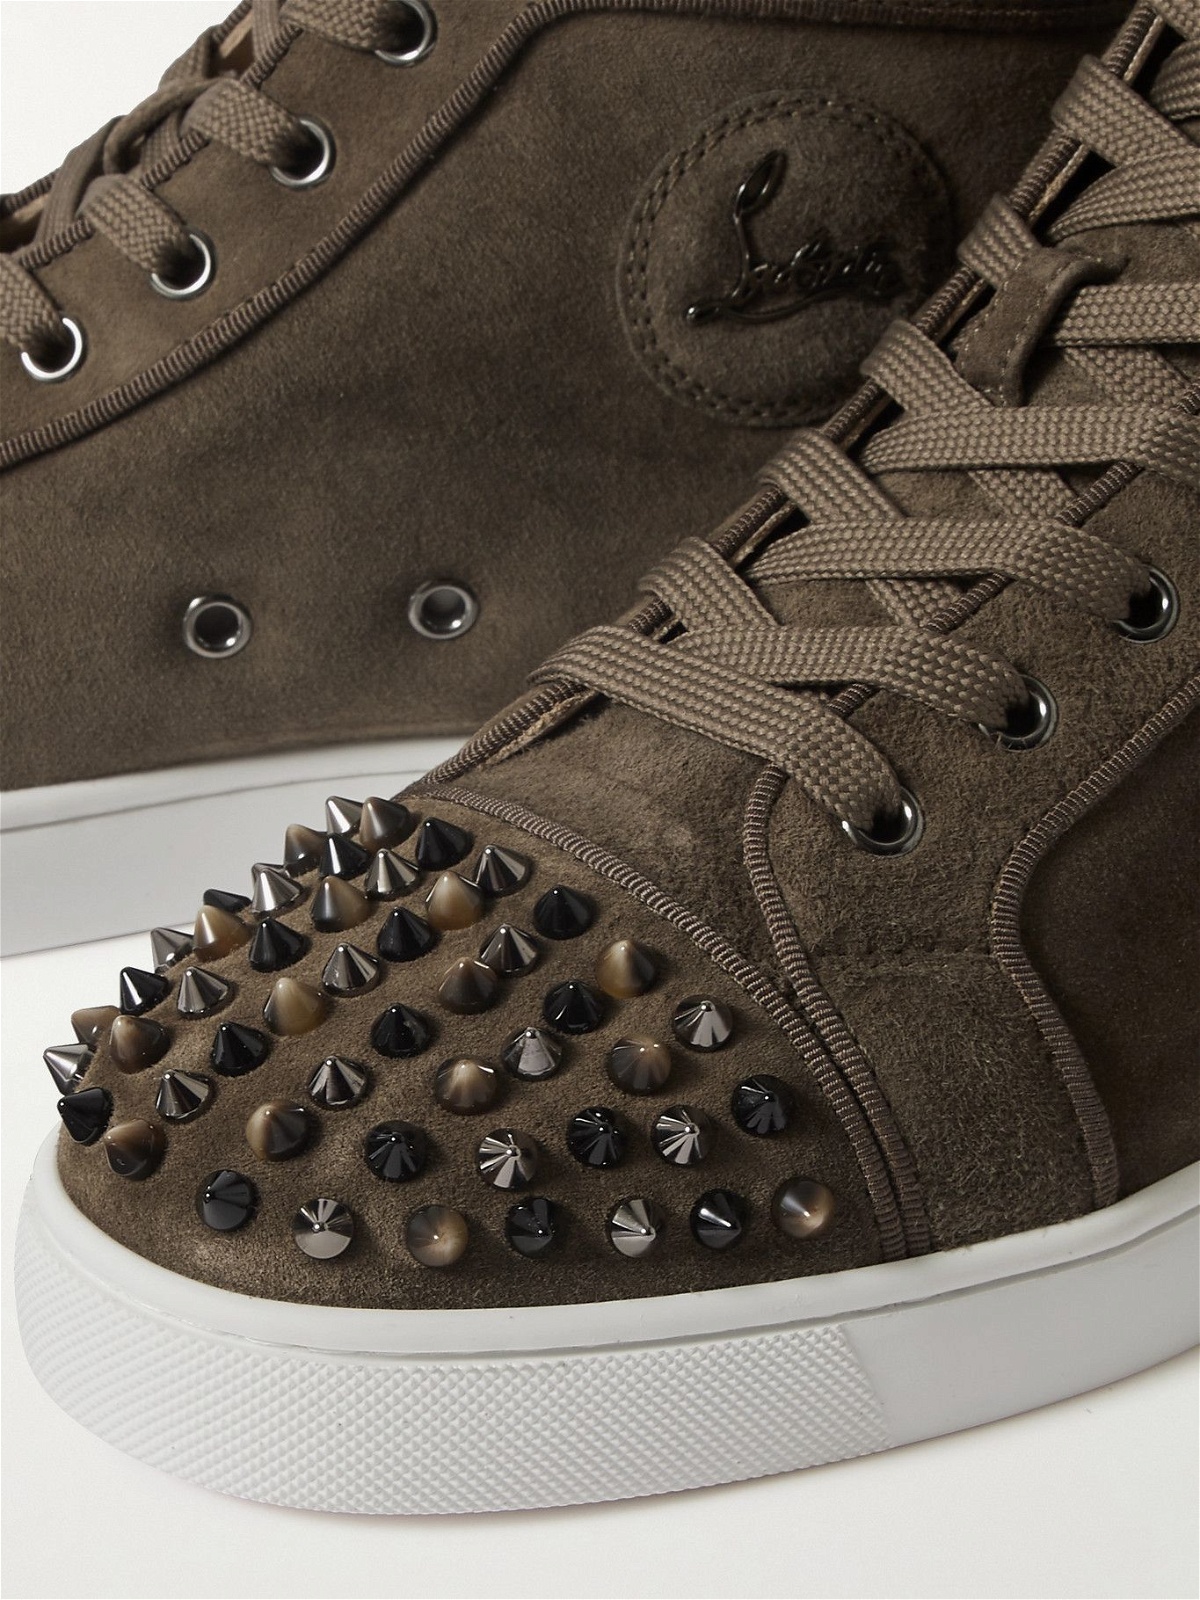 Christian Louboutin Men's Lou Spikes Suede High-Top Sneakers